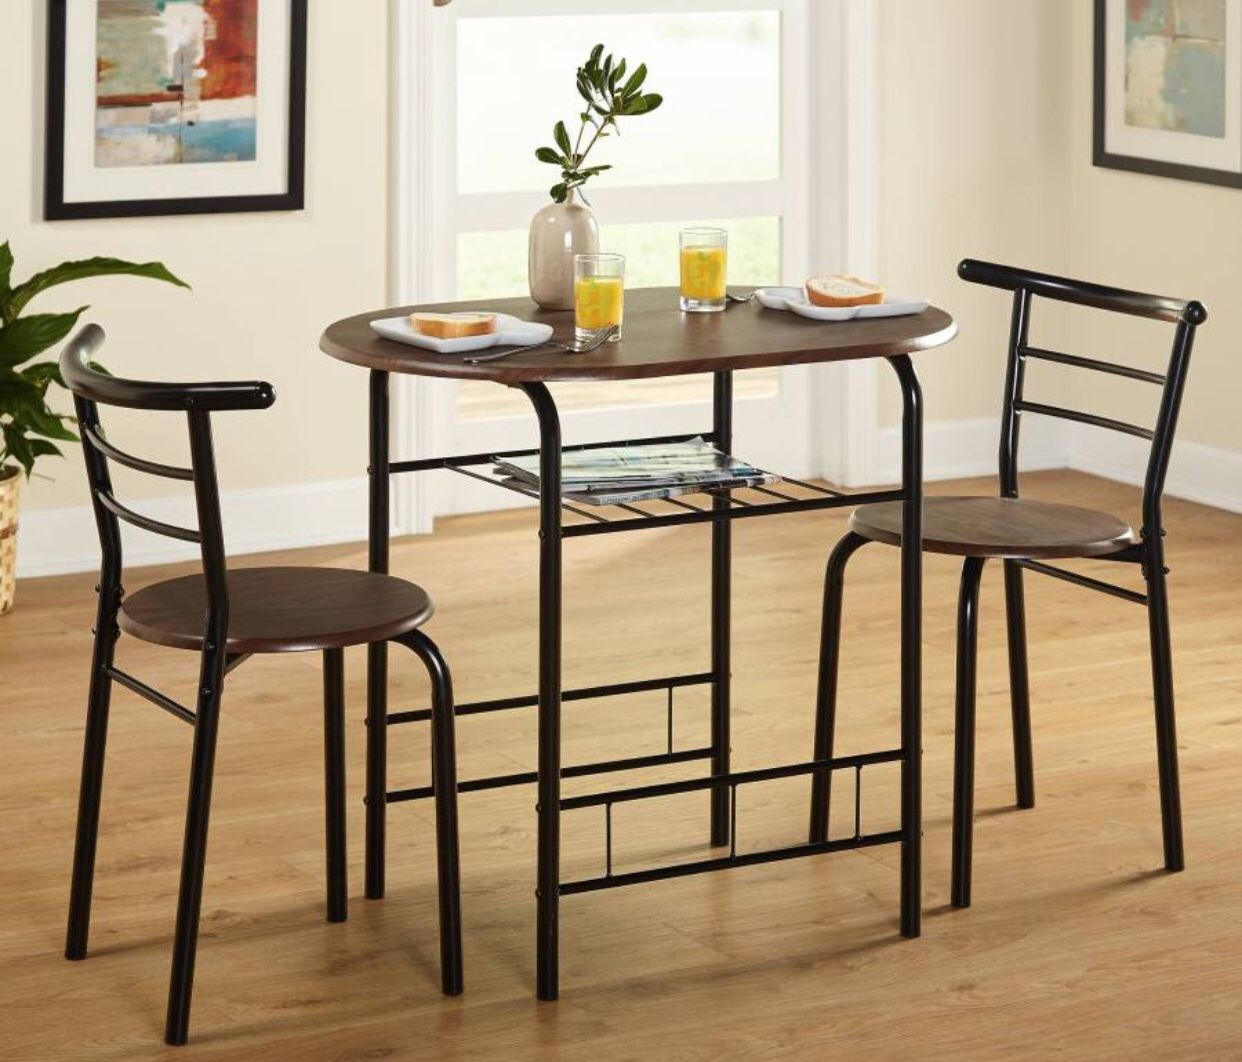 Bistro kitchen set table with 2 chairs - NEW